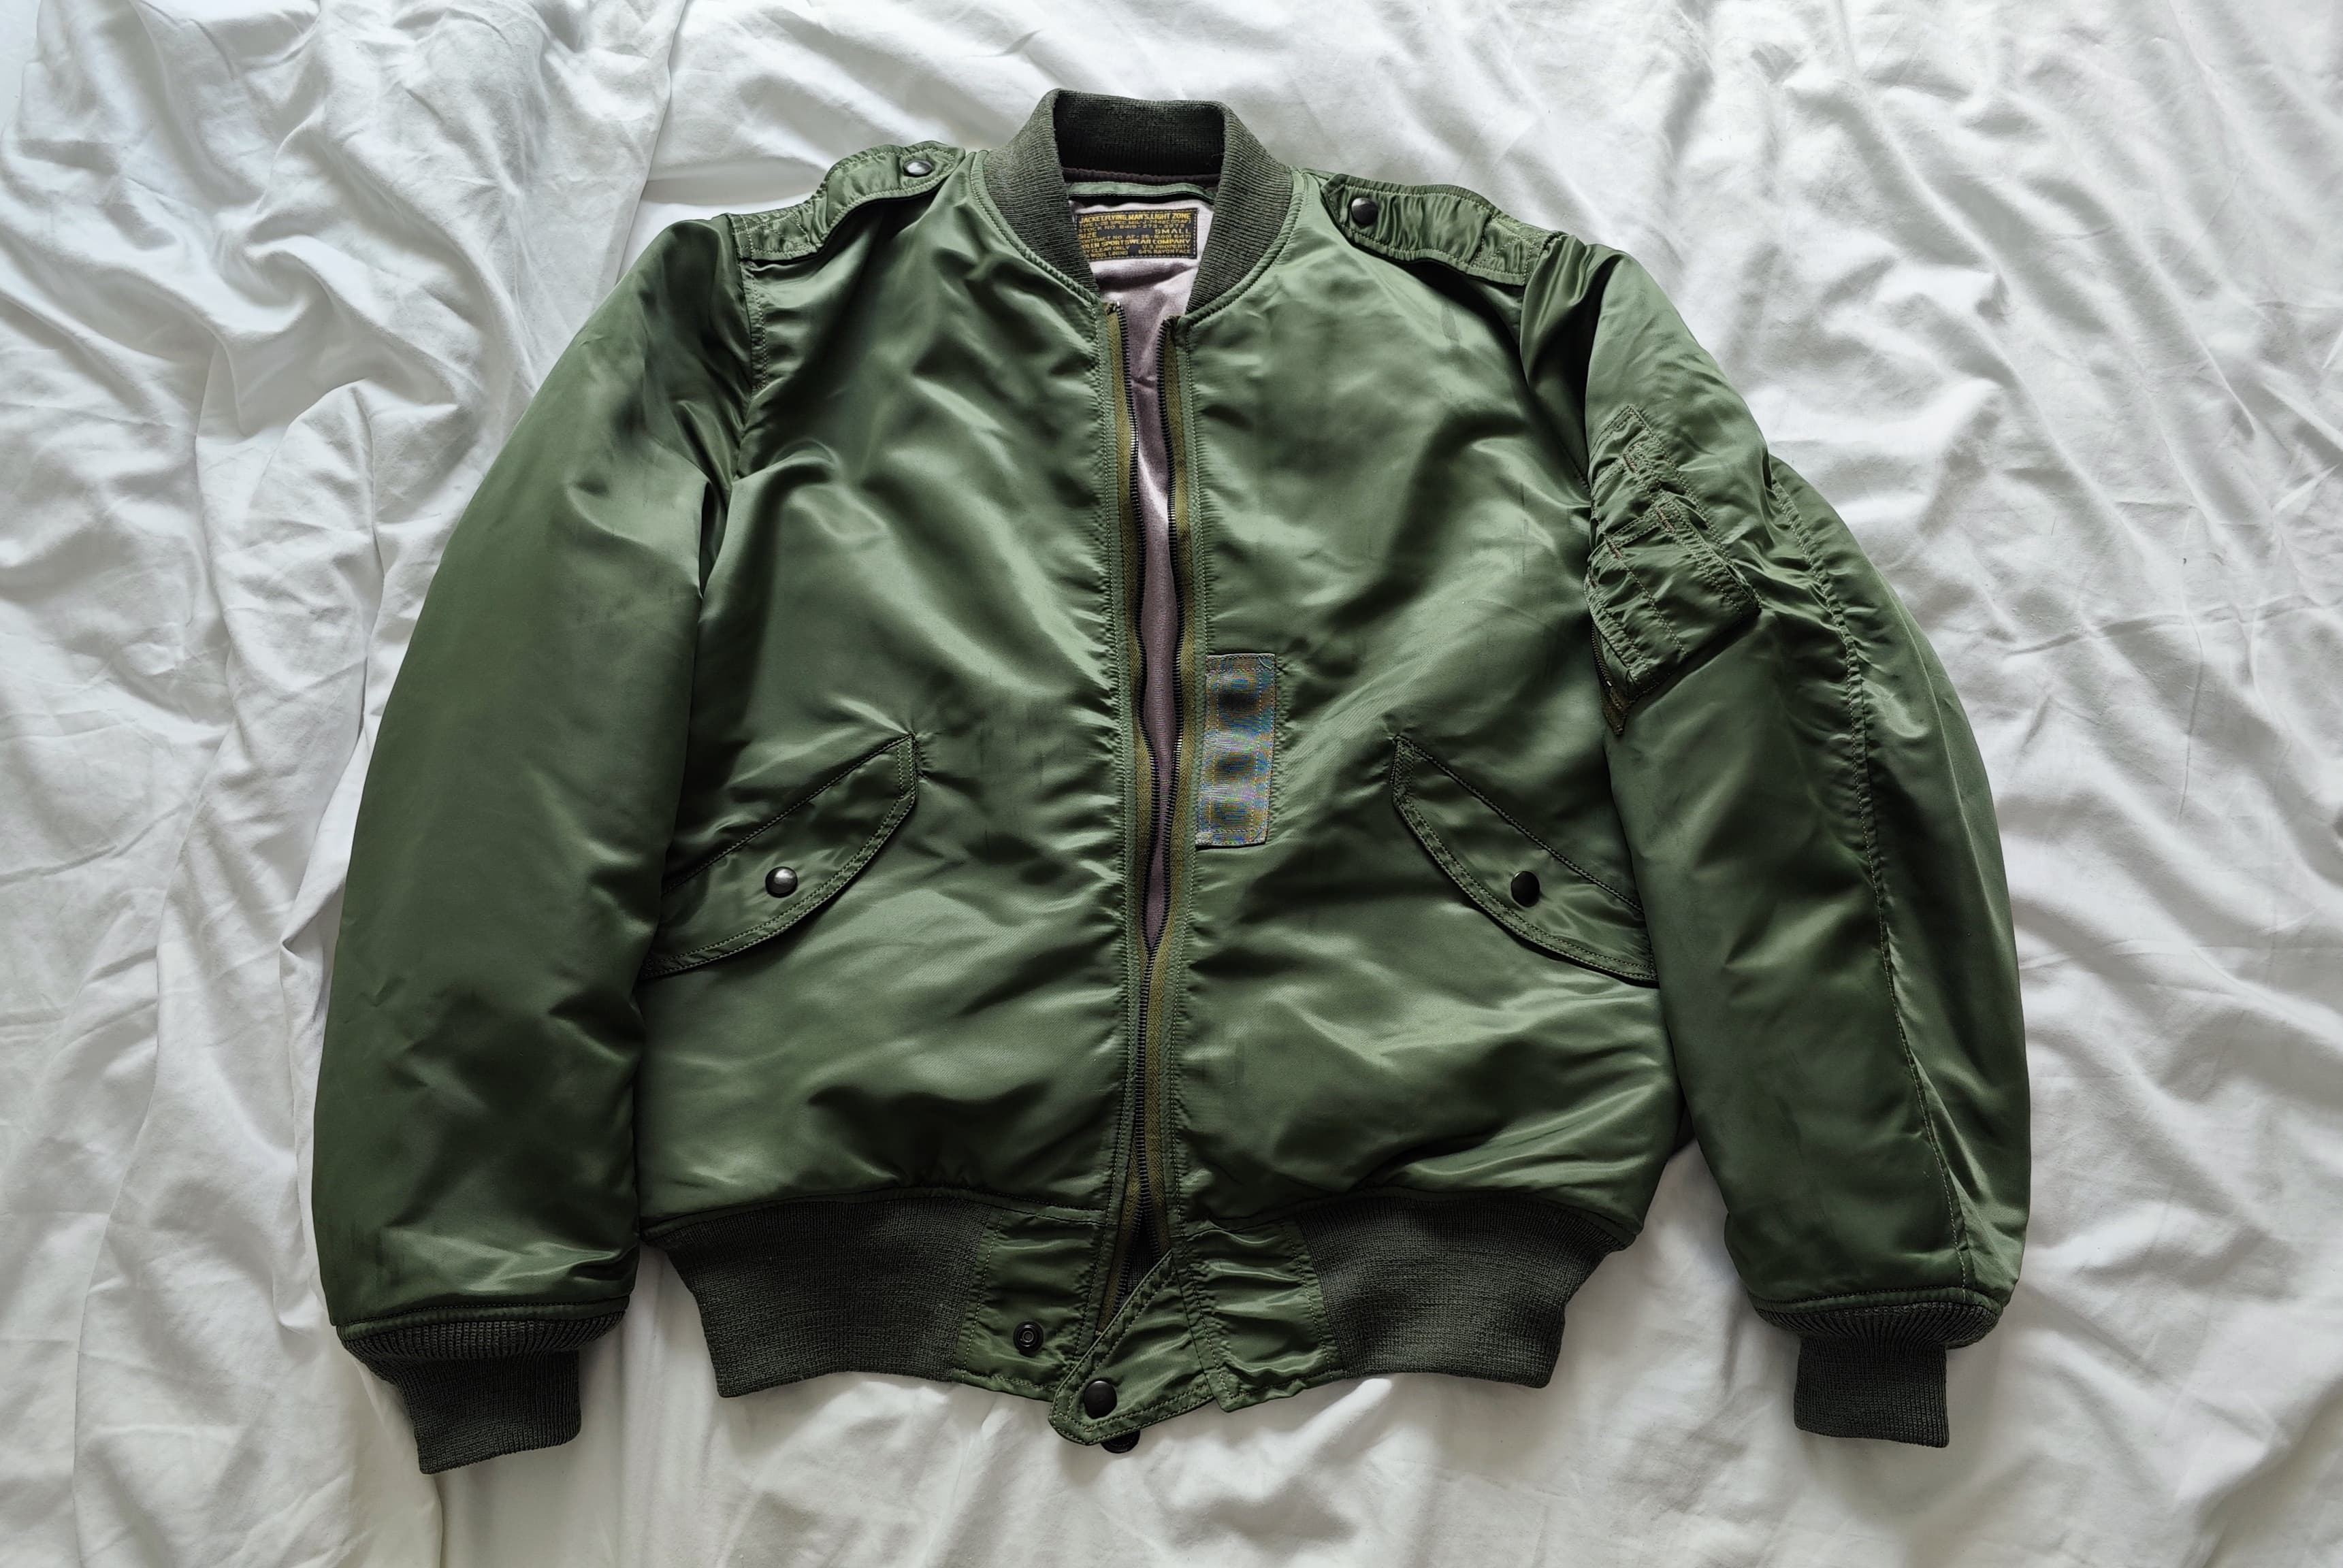 Deliveries from GW | Vintage Leather Jackets Forum